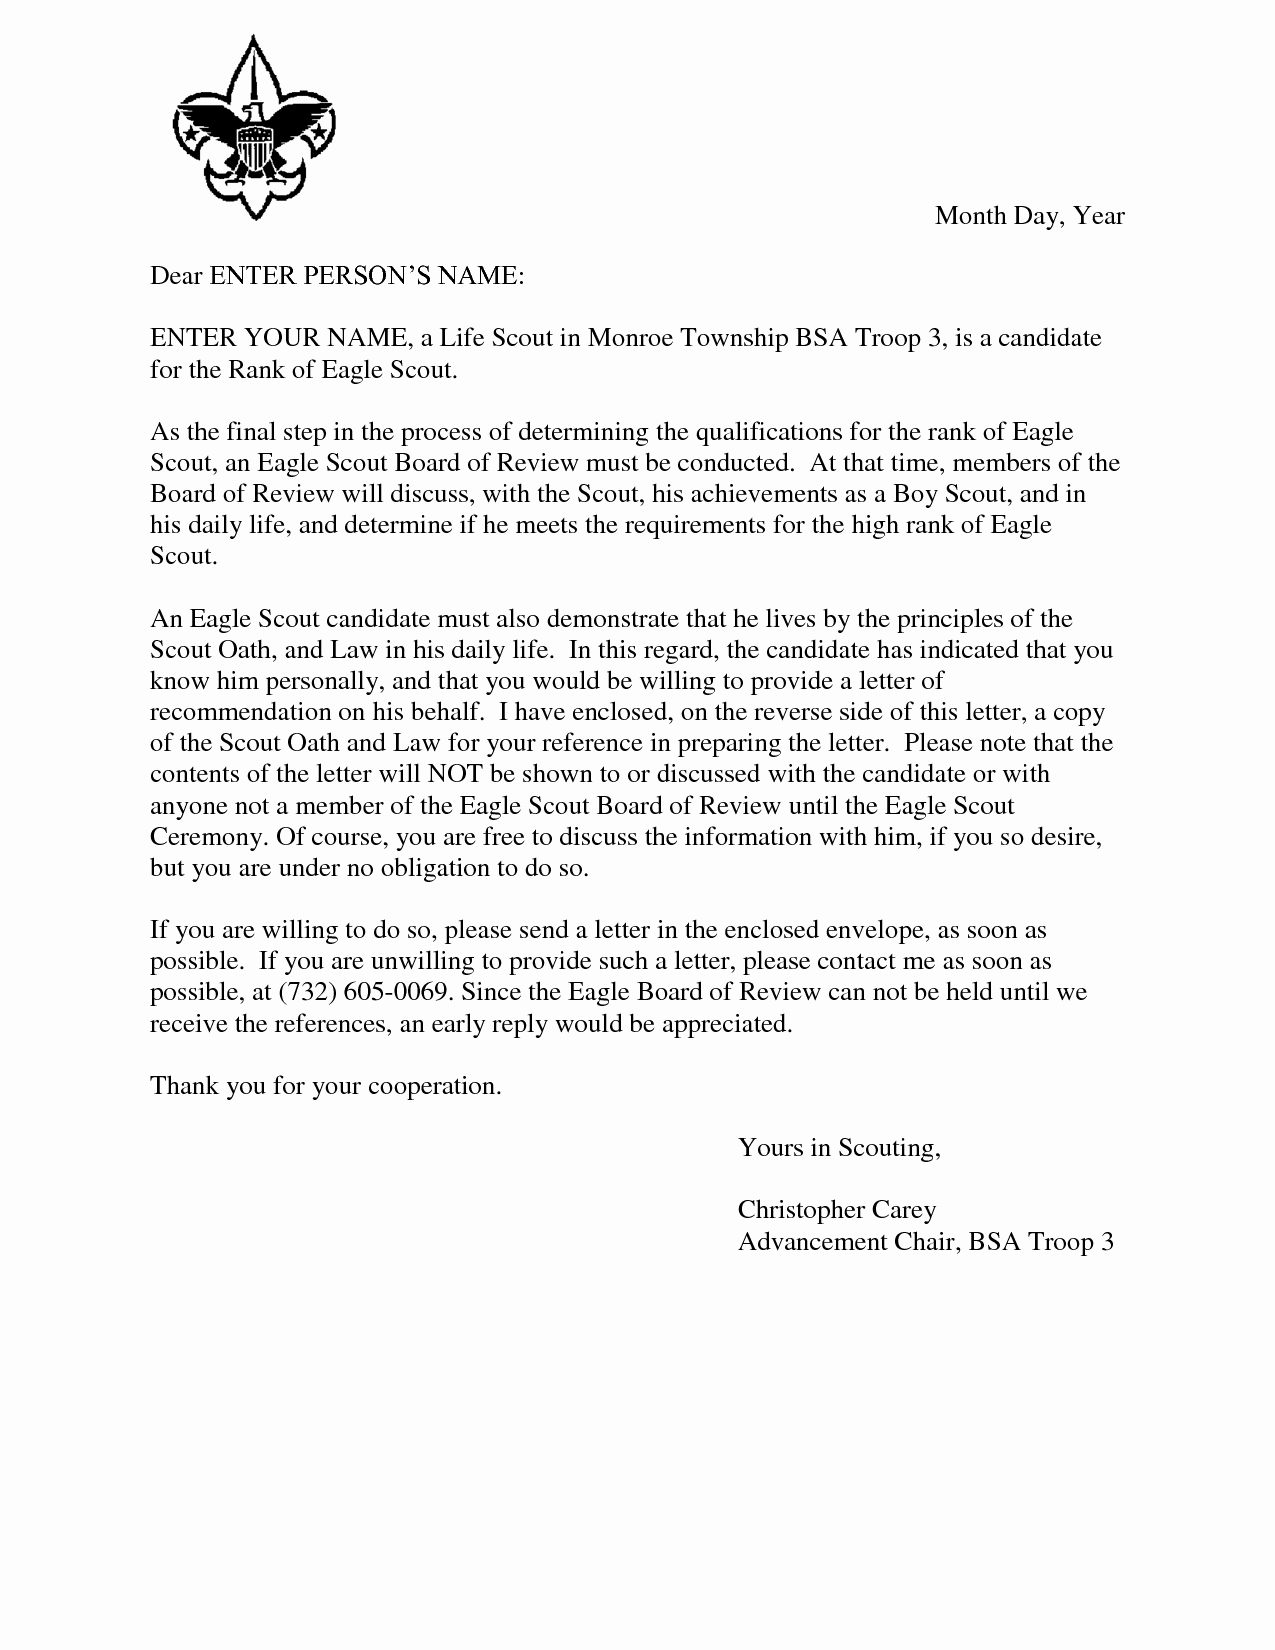 Eagle Letter Of Recommendation Elegant Eagle Scout Letter From Parents to Pin On